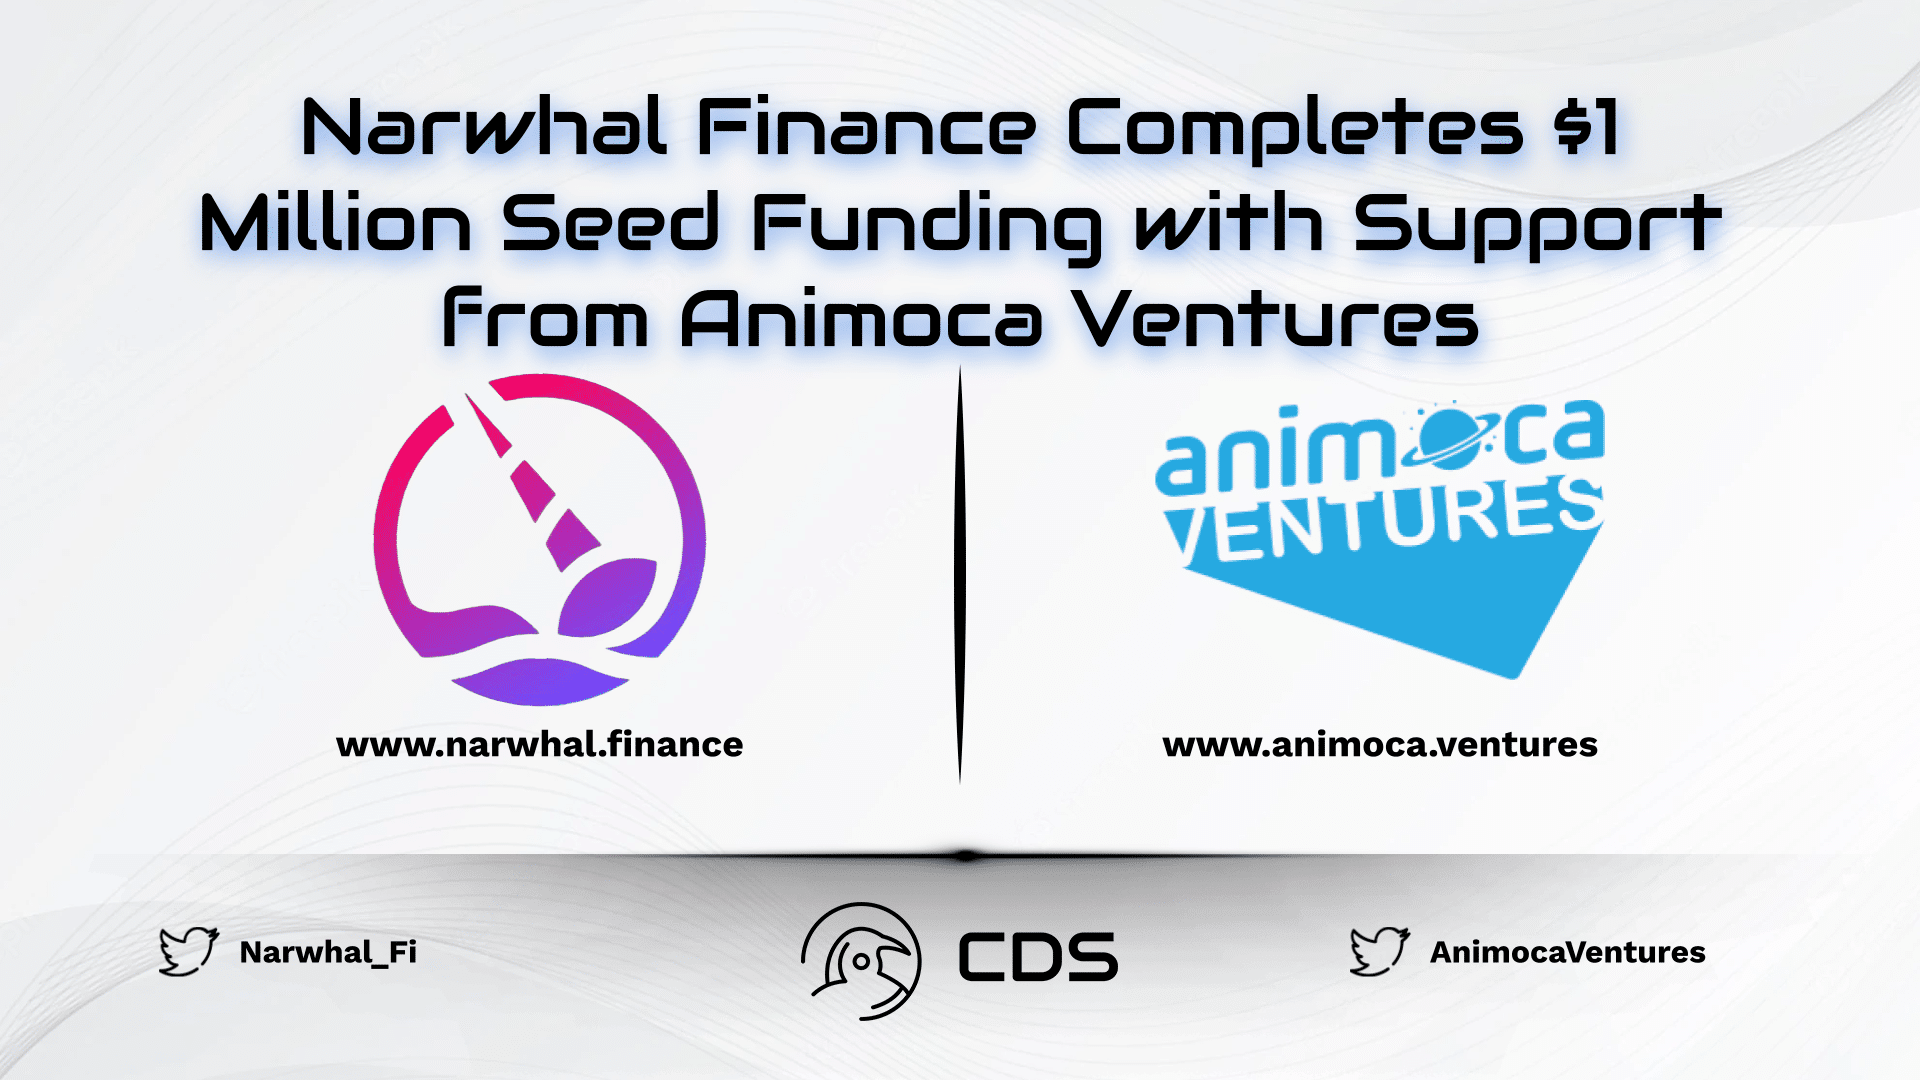 Narwhal Finance Completes $1 Million Seed Funding with Support from Animoca Ventures